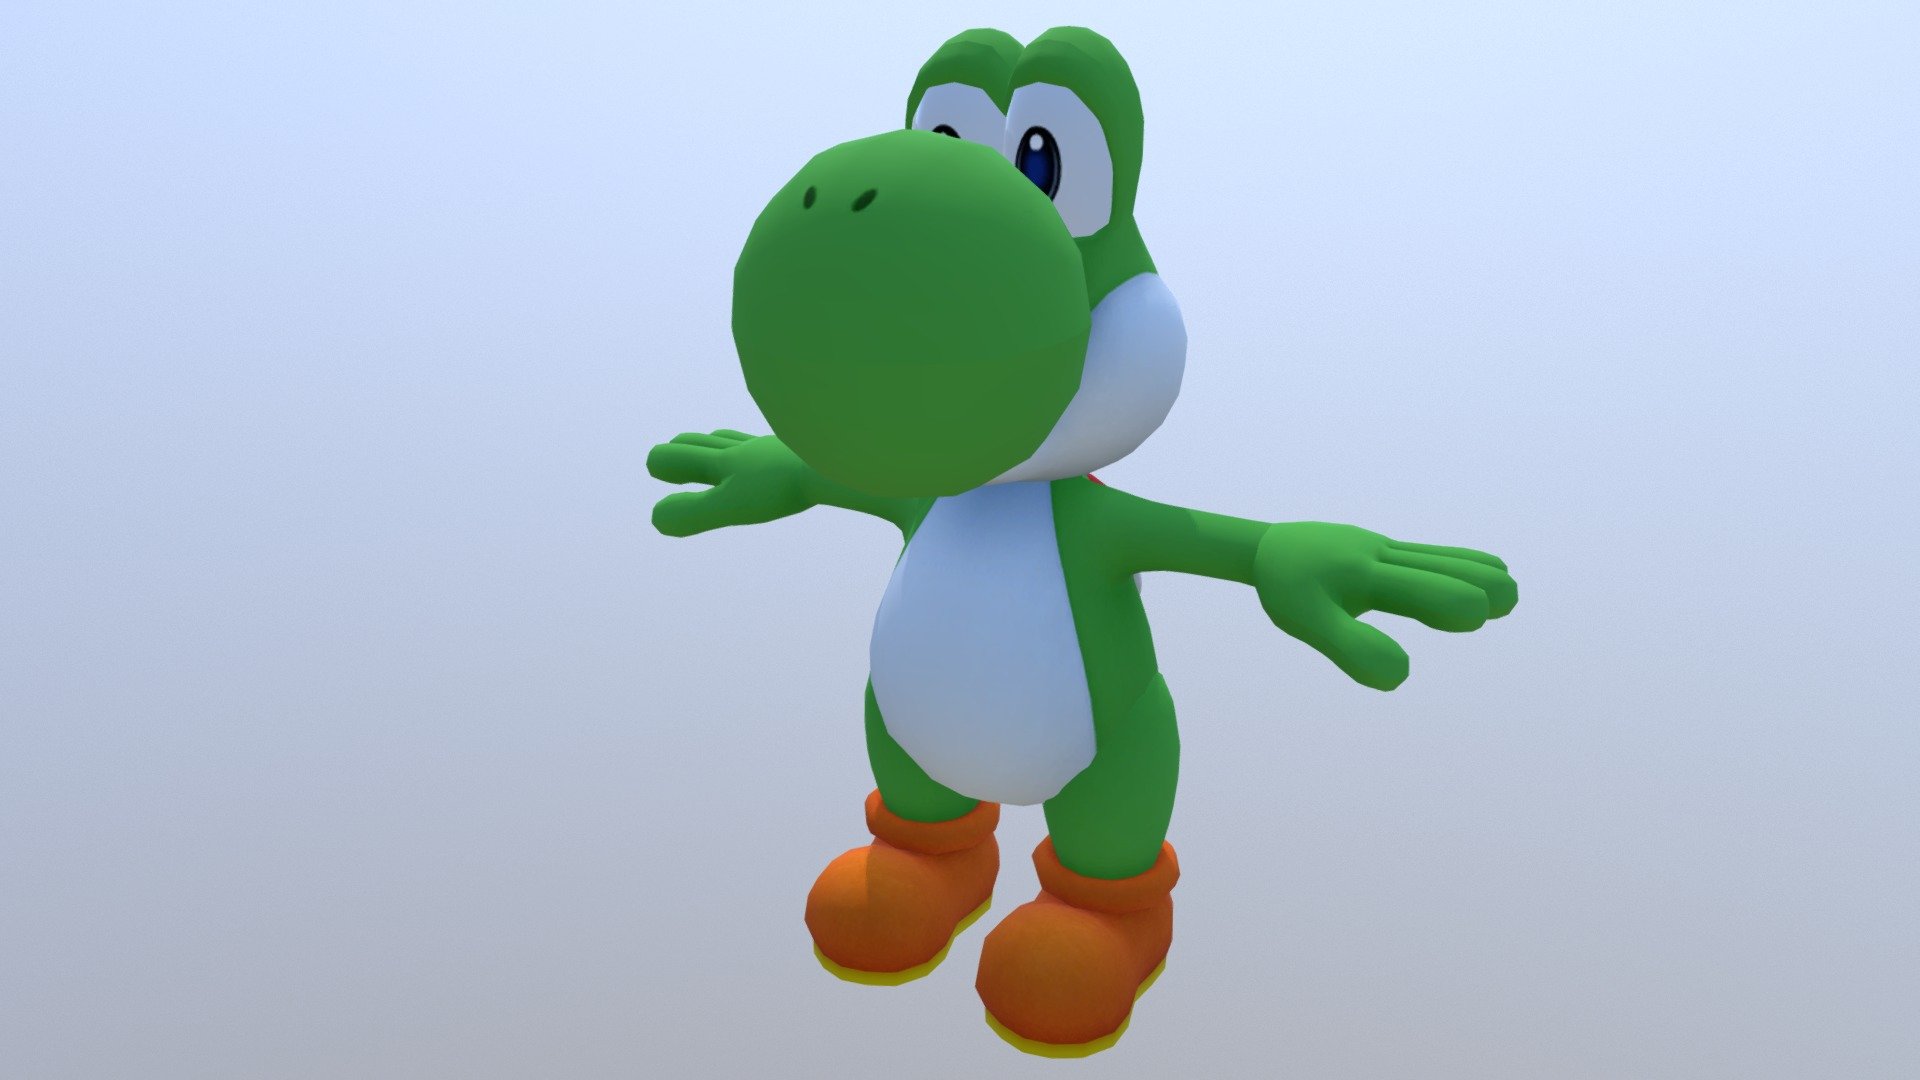 3D model Mario Luigi And Yoshi From Game VR / AR / low-poly